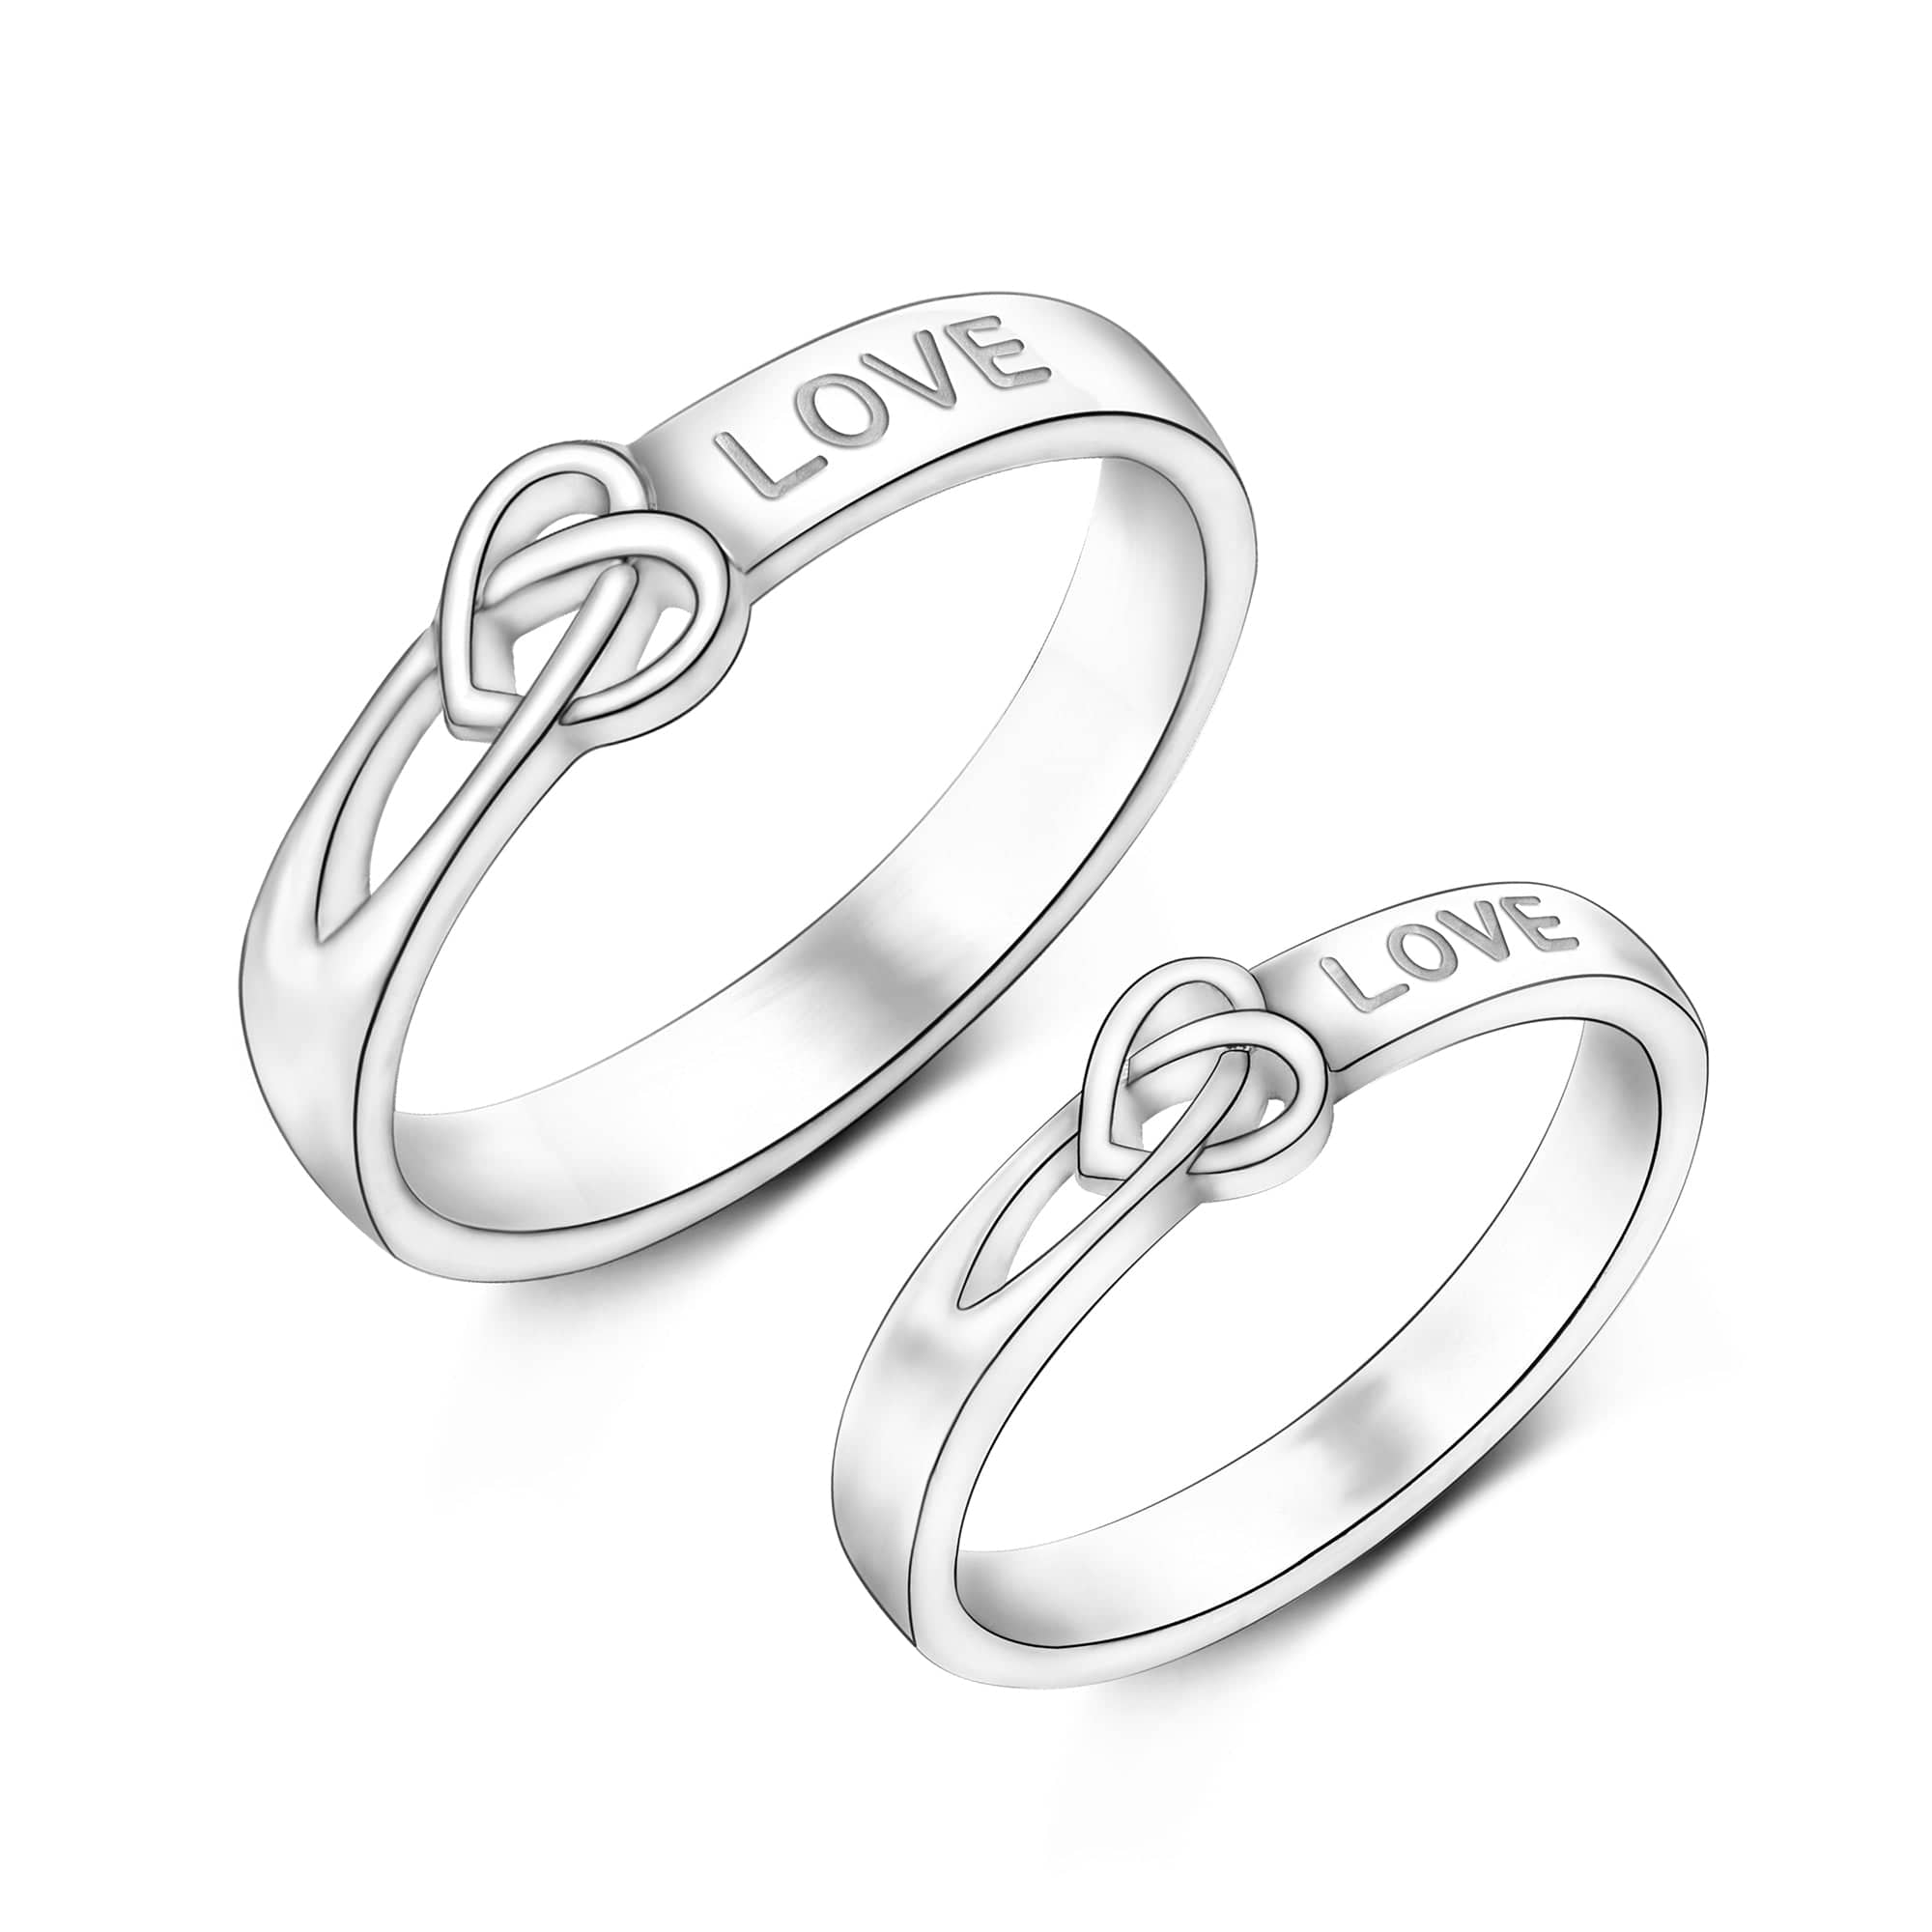 Soul Artificial Silver Plated Crystal Infinity Adjustable Couple Rings For  Lovers Propose Wedding Engagement Gift Sets